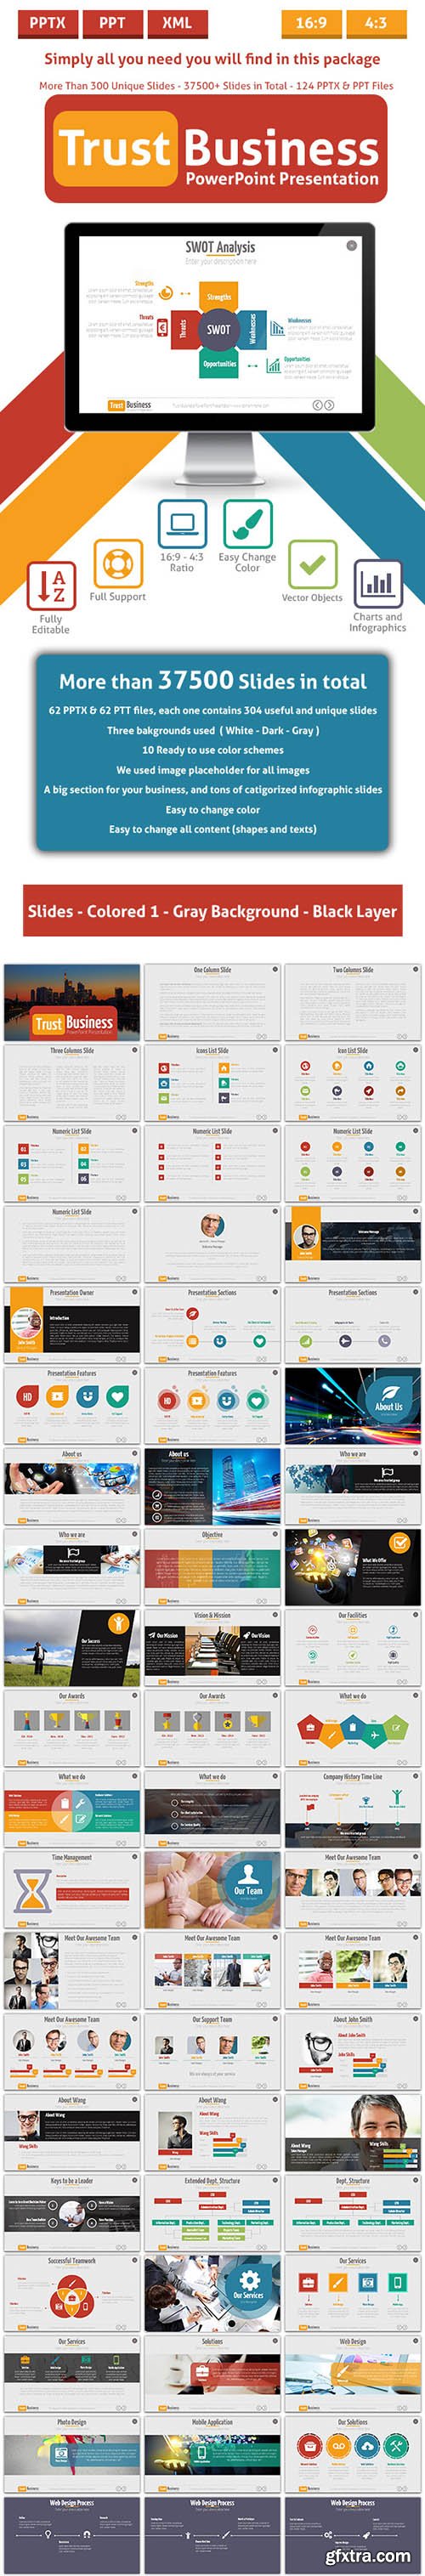 Graphicriver Trust Business PowerPoint Presentation Template 11146006